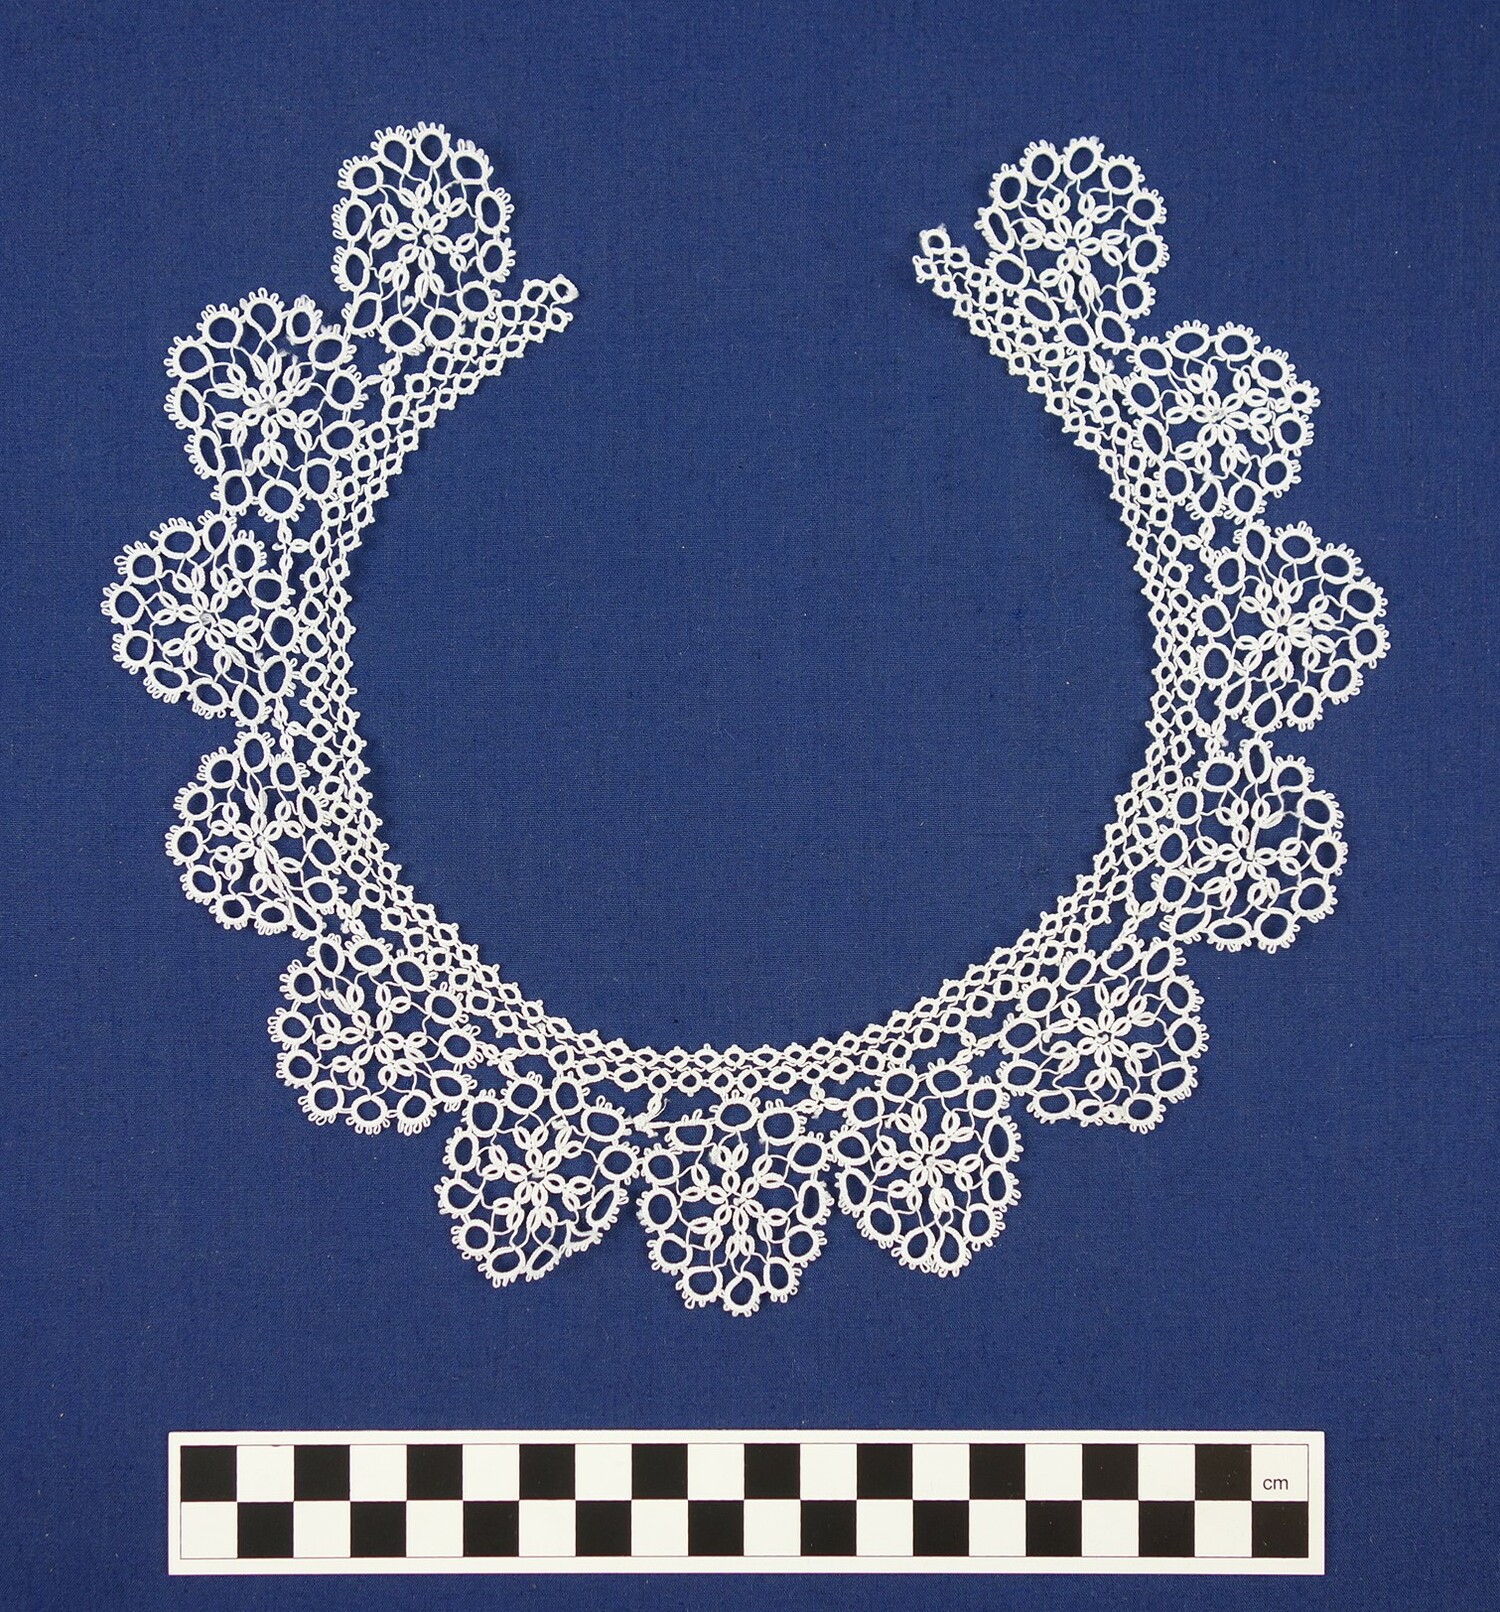 Tatted lace collar, Europe, 20th century (TRC 2016.2431).